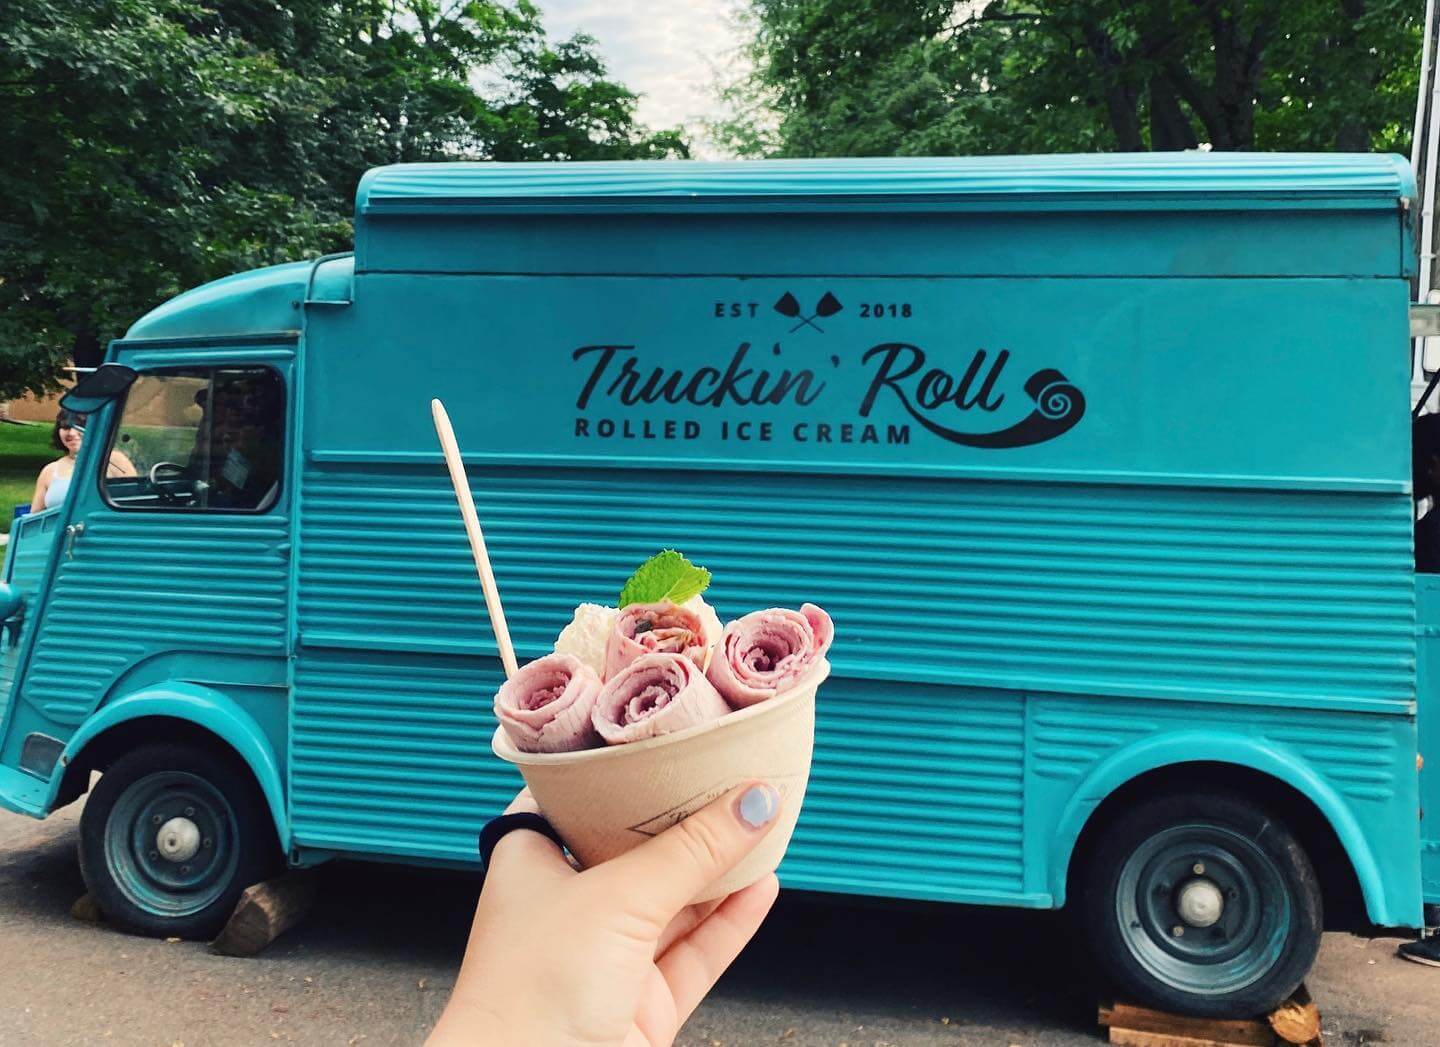 Ice cream served in front of the blue truckin roll truck